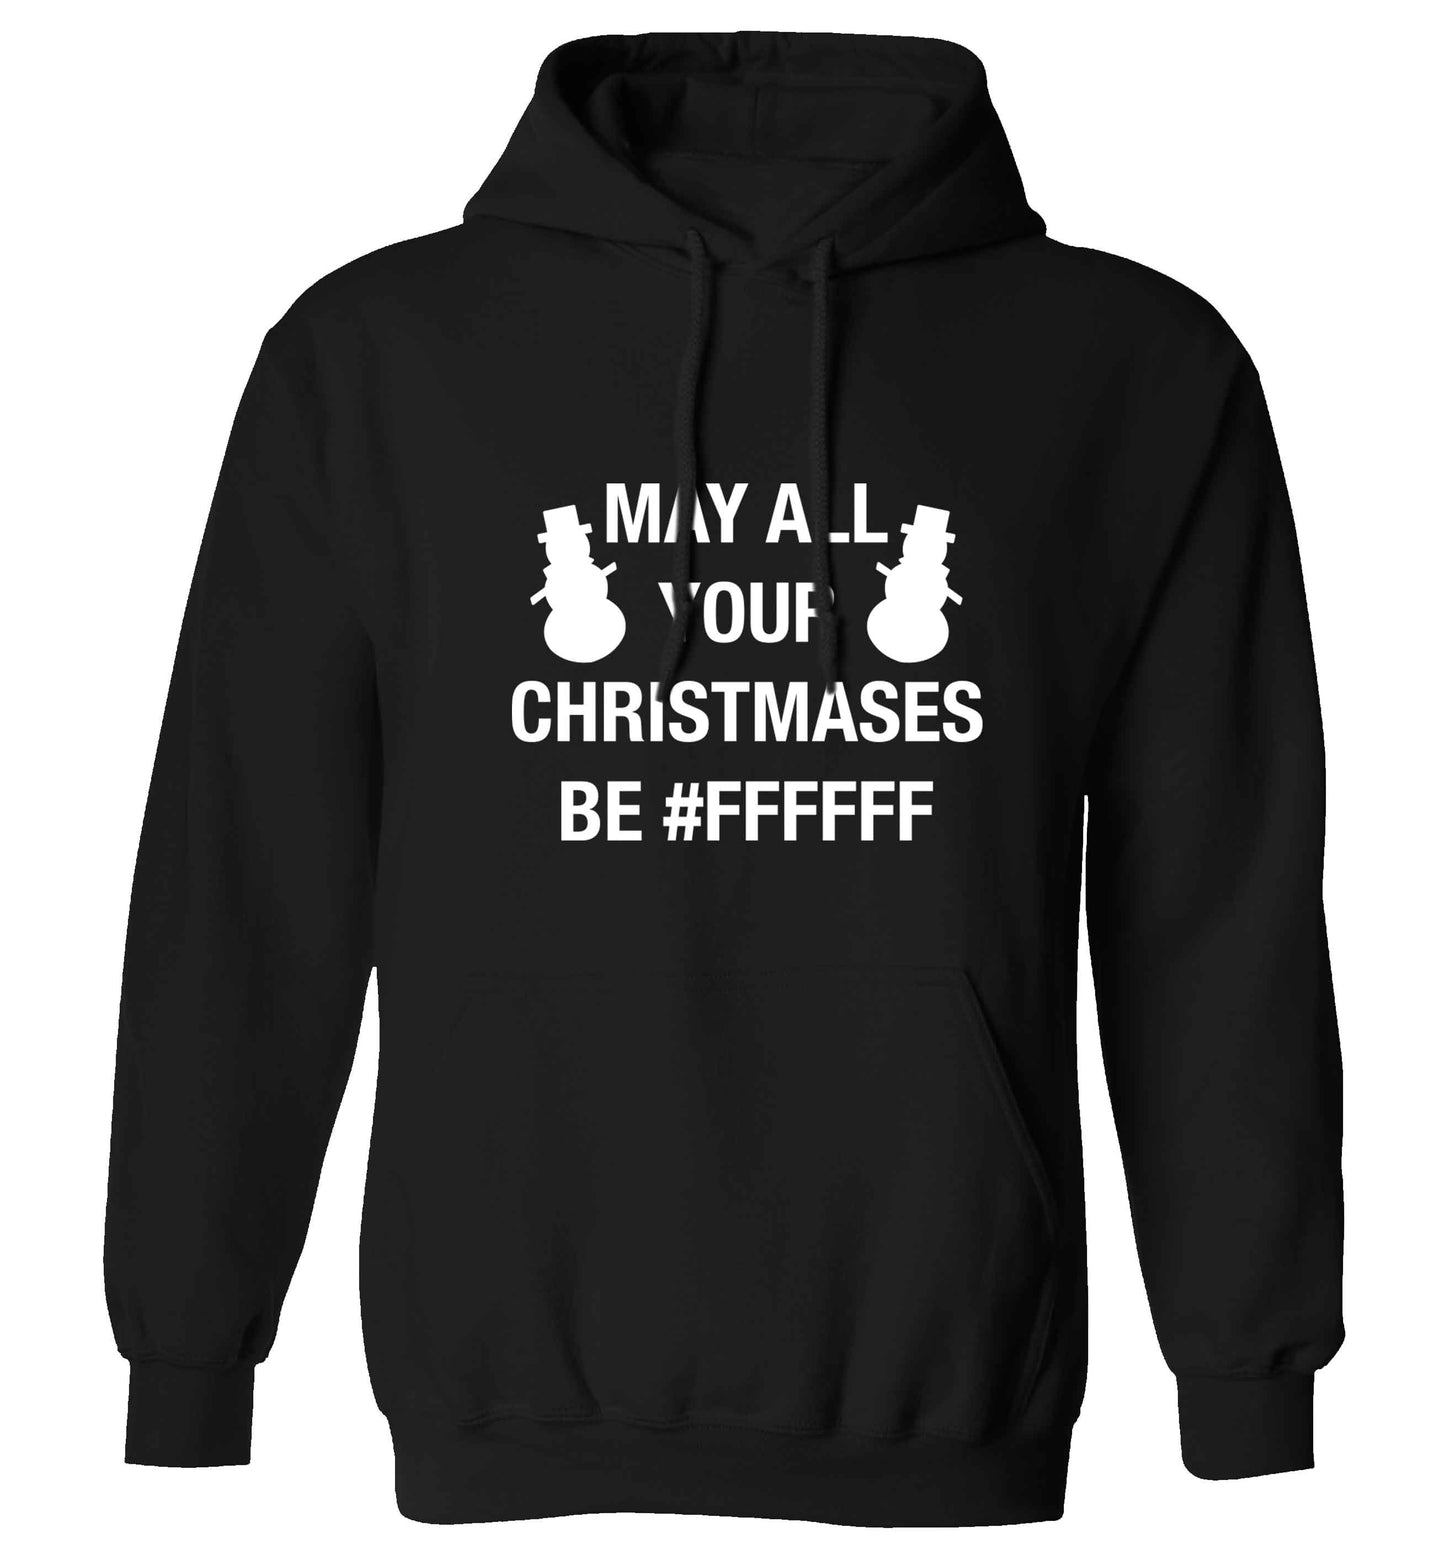 May all your Christmases be #FFFFFF adults unisex black hoodie 2XL